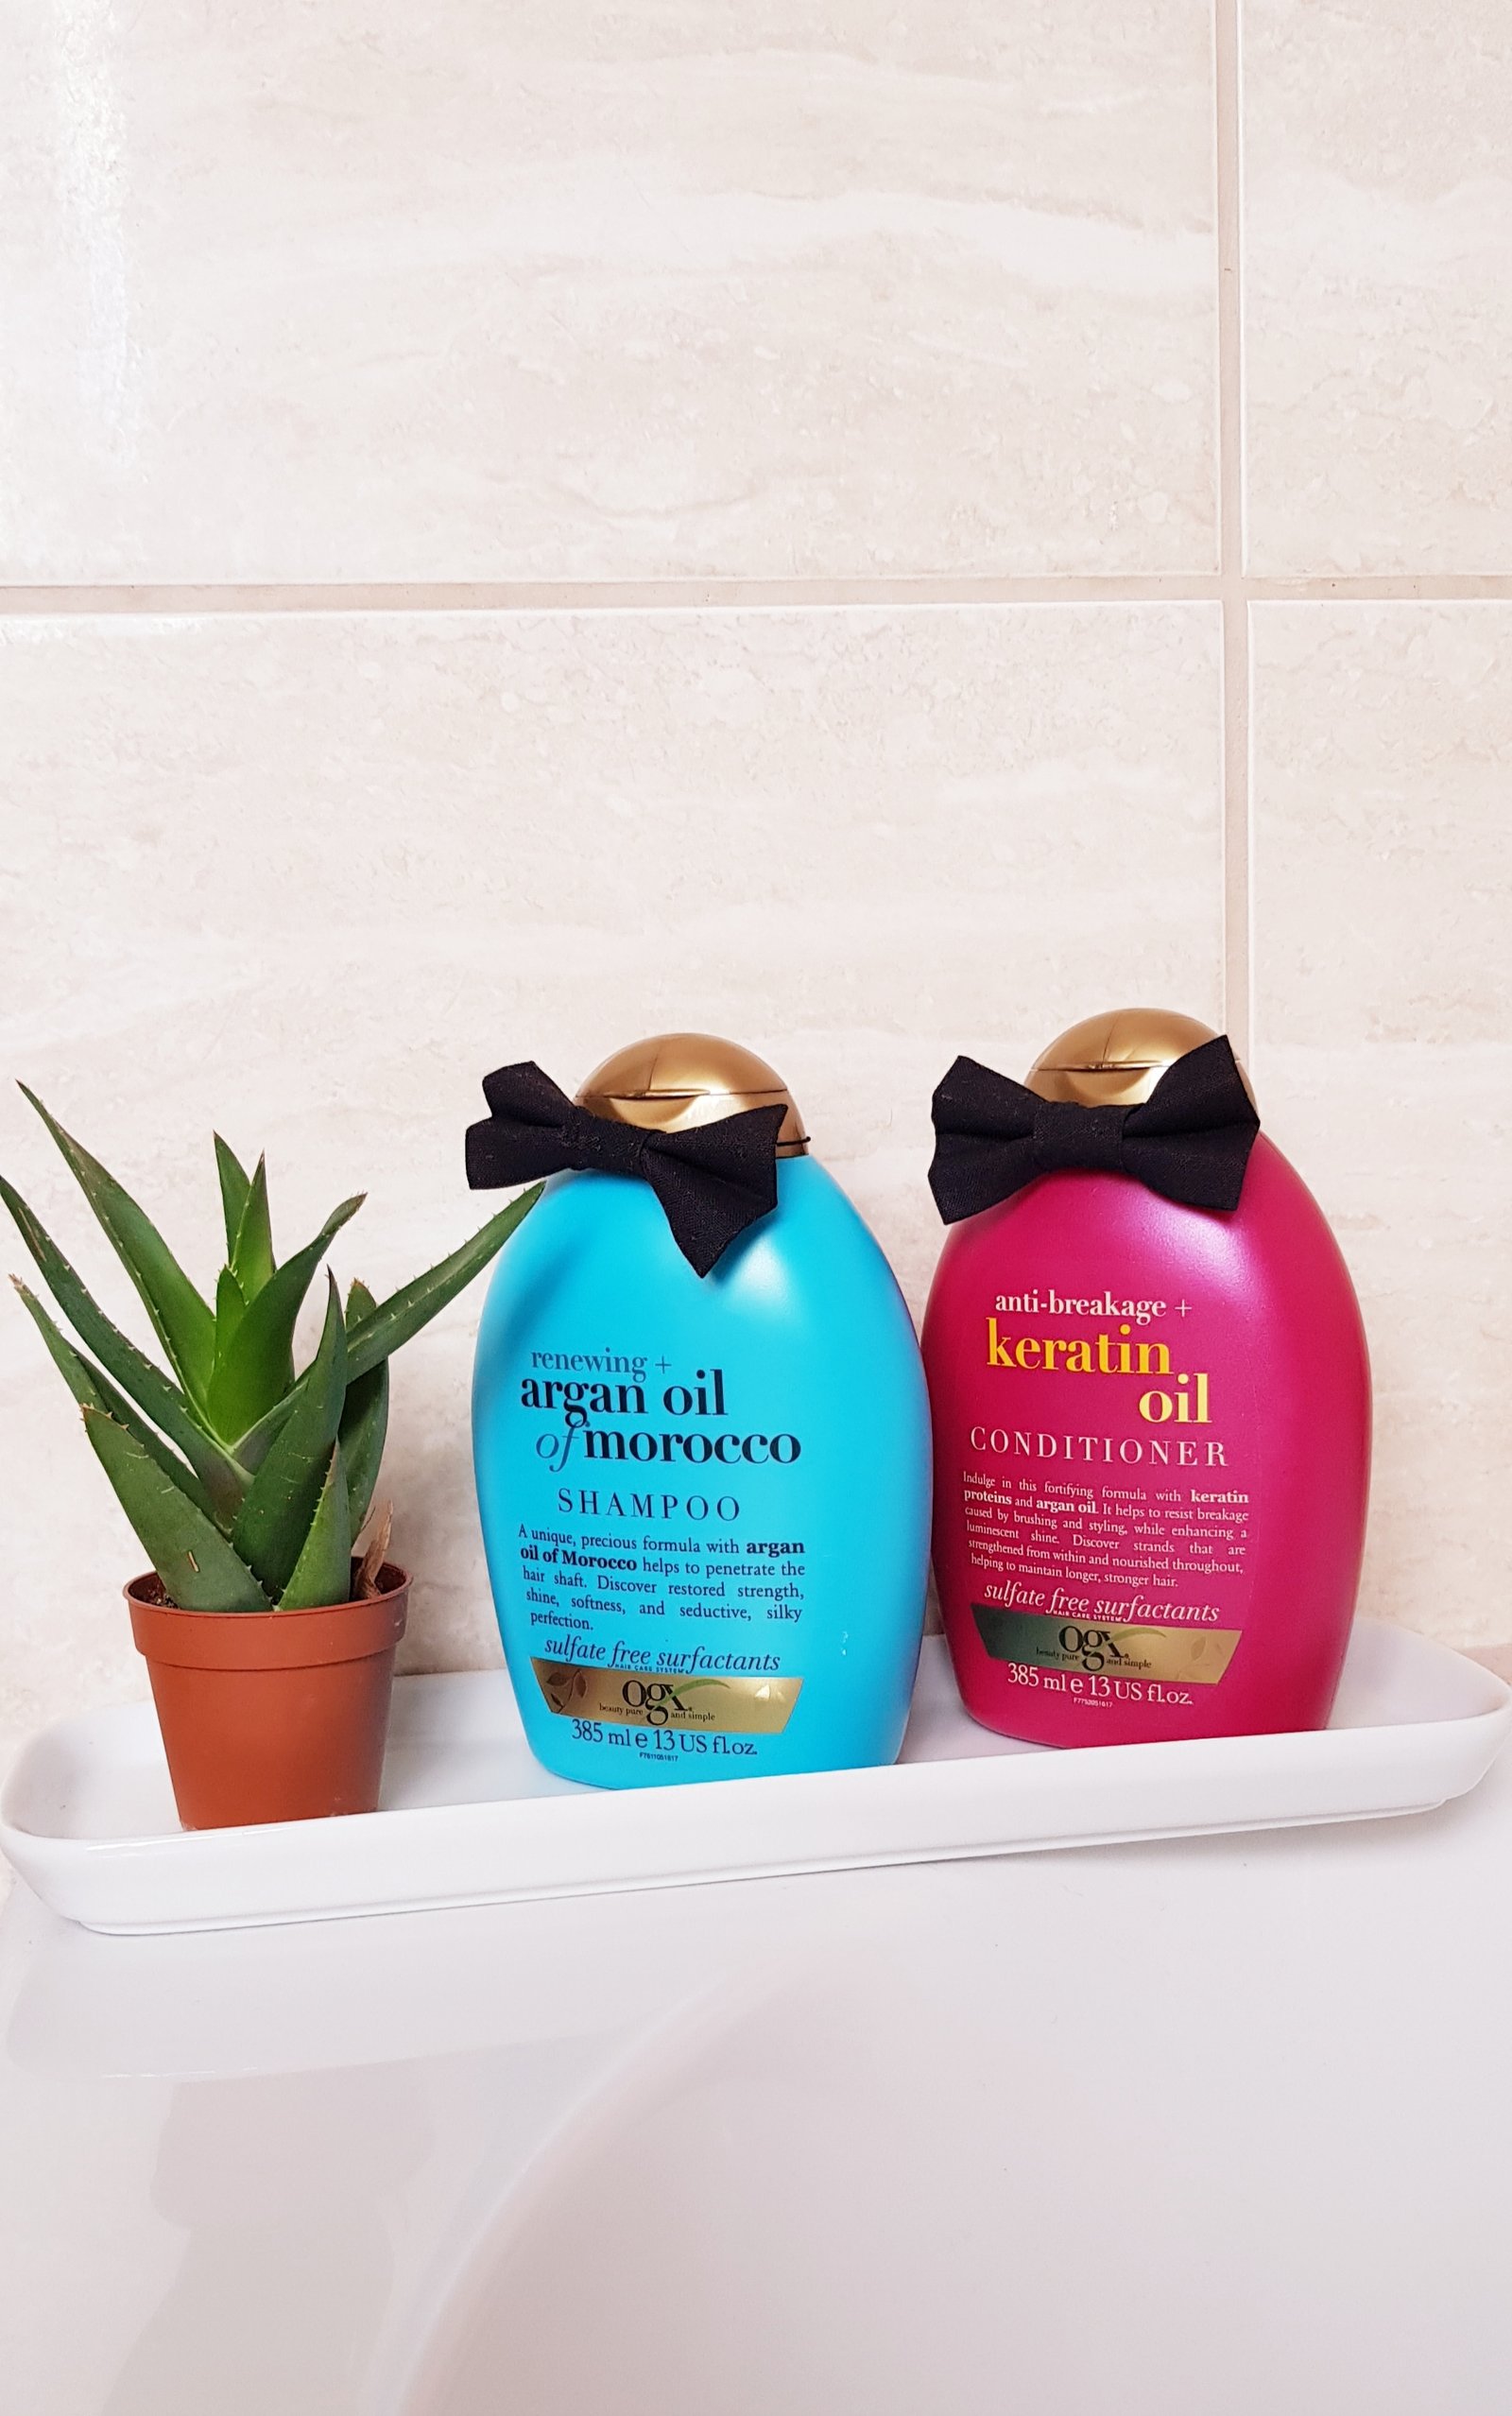 Ogx Sulphate-free shampoo and conditioner - Ms Tantrum Blog